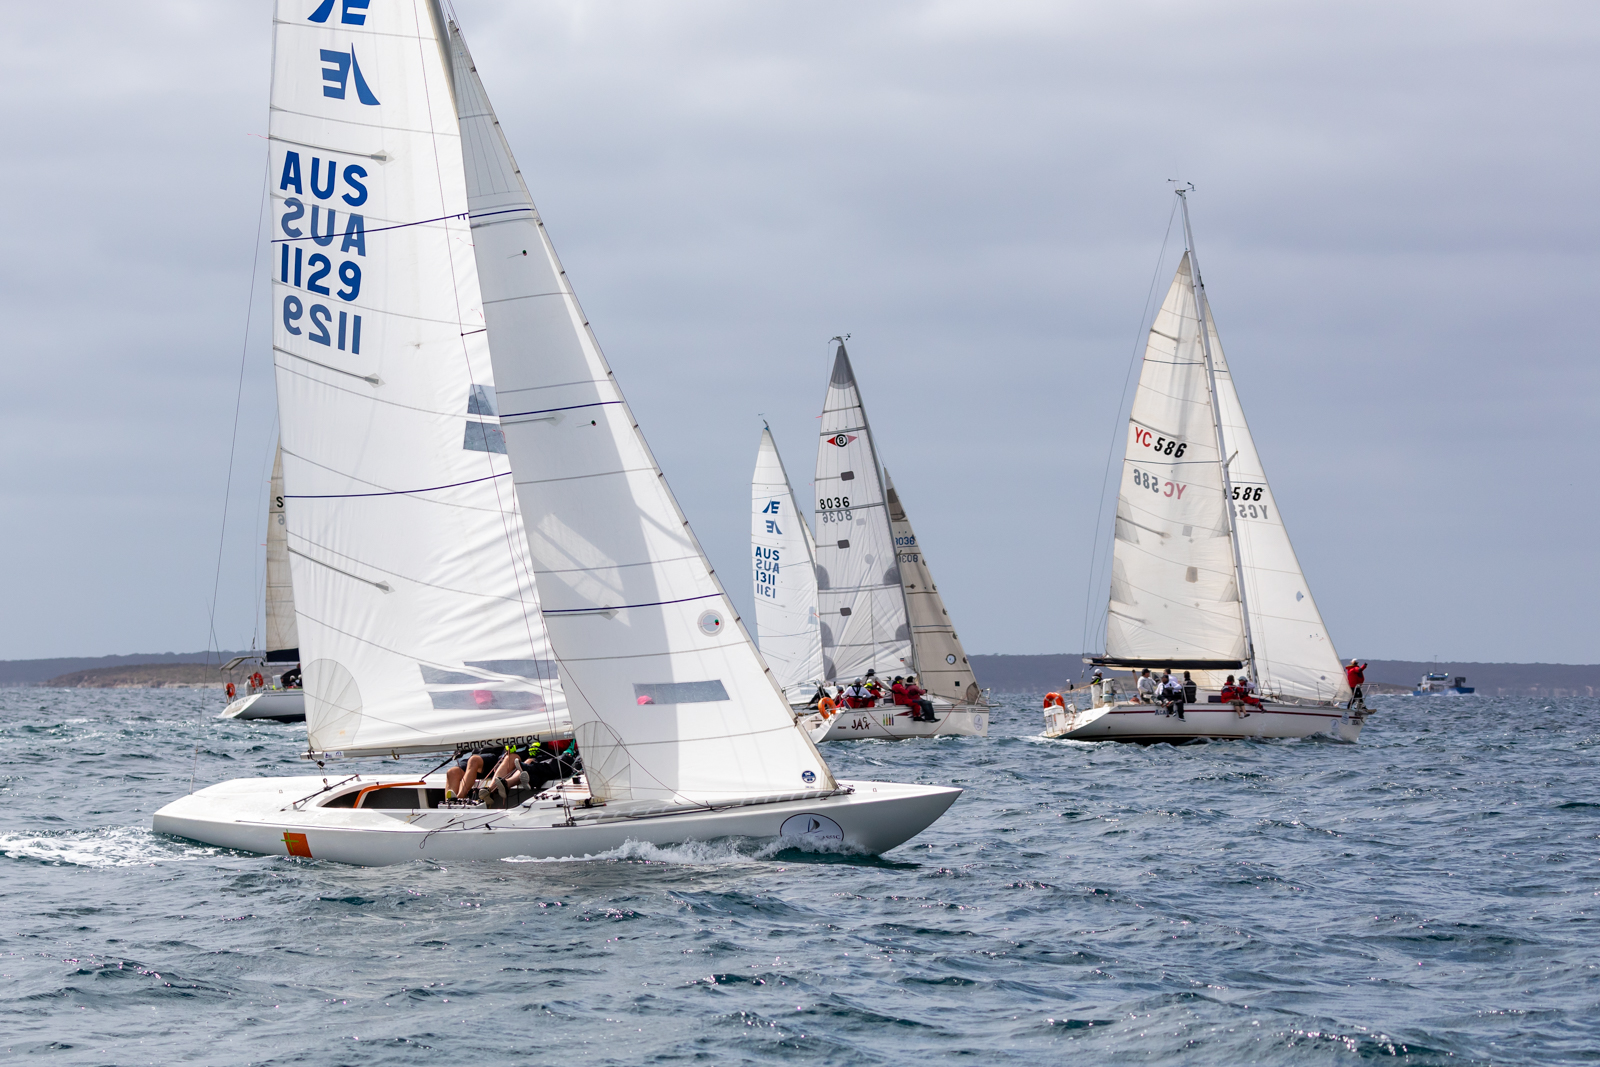 Regatta kicks off with two races around the cans in Boston Bay | Teakle Classic